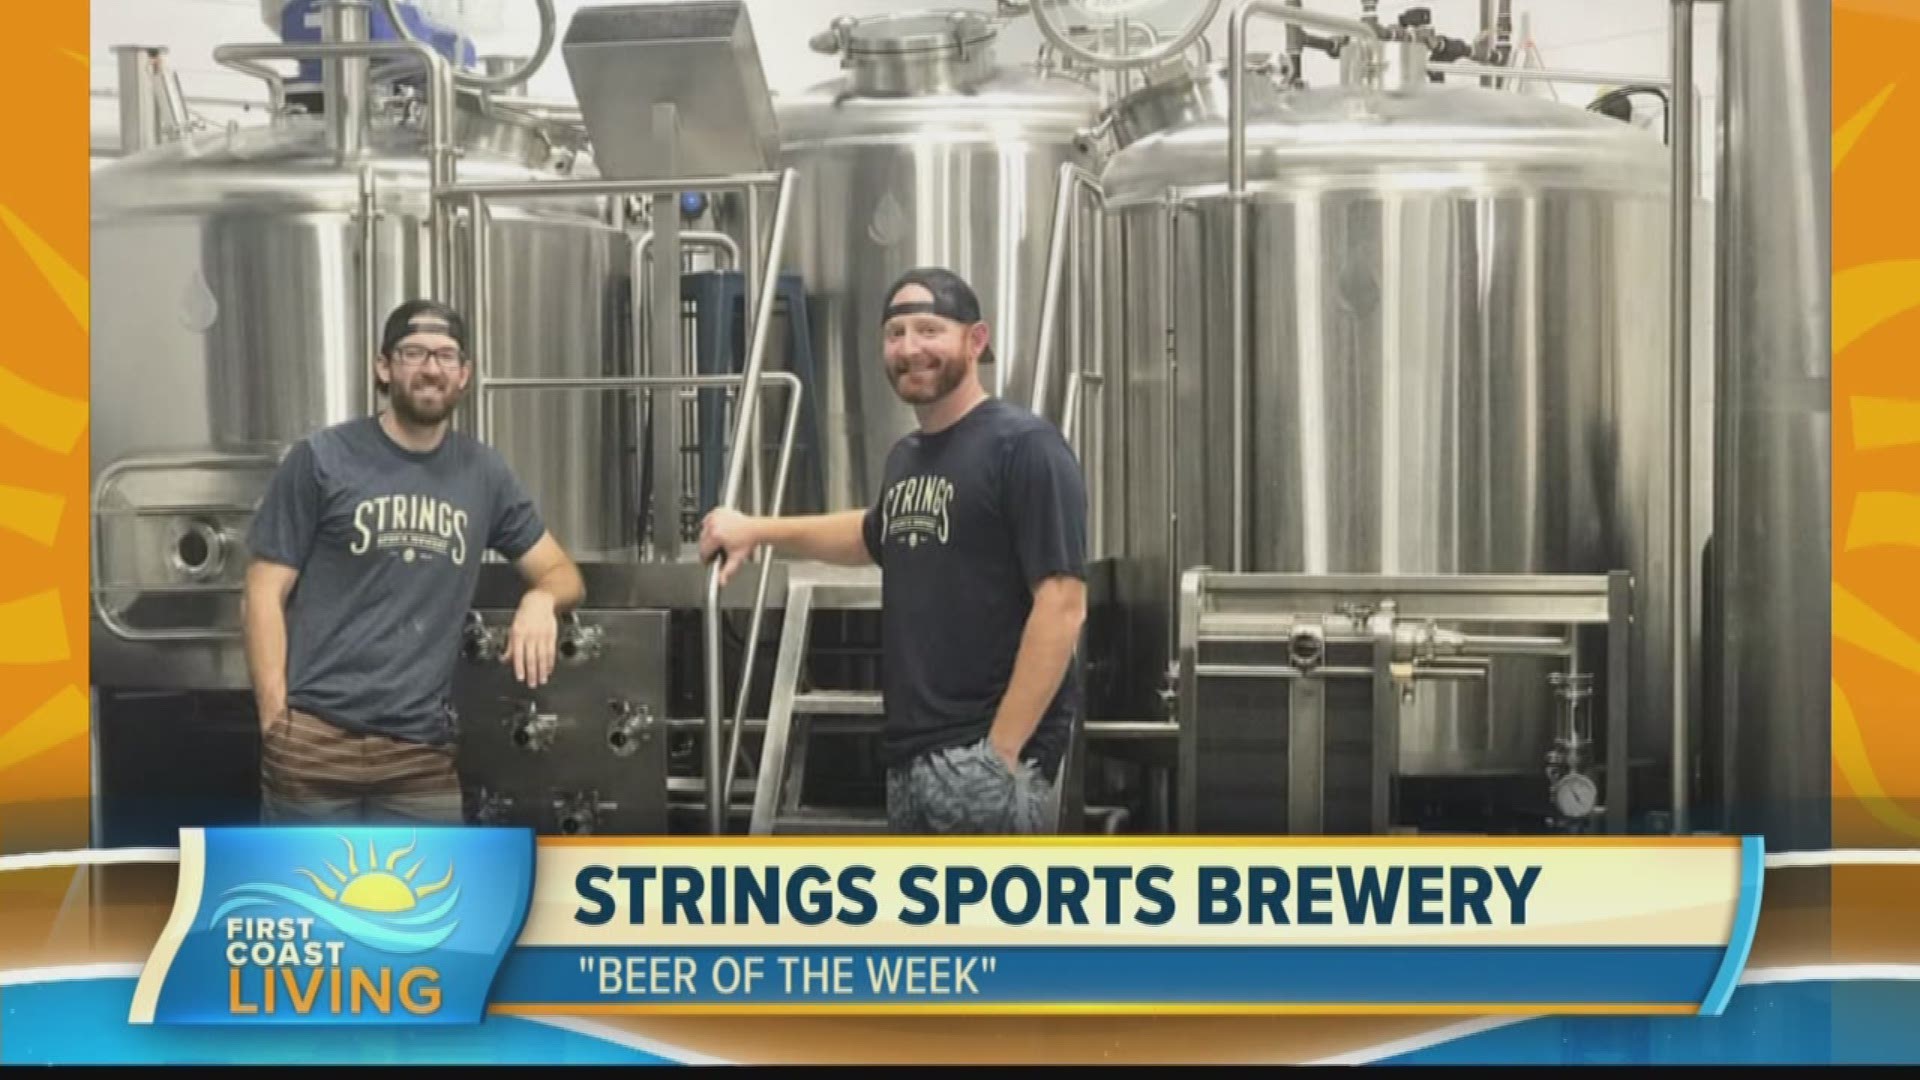 A new brewery is making its way to Springfield. Learn more about Strings Sports Brewery and what they do.